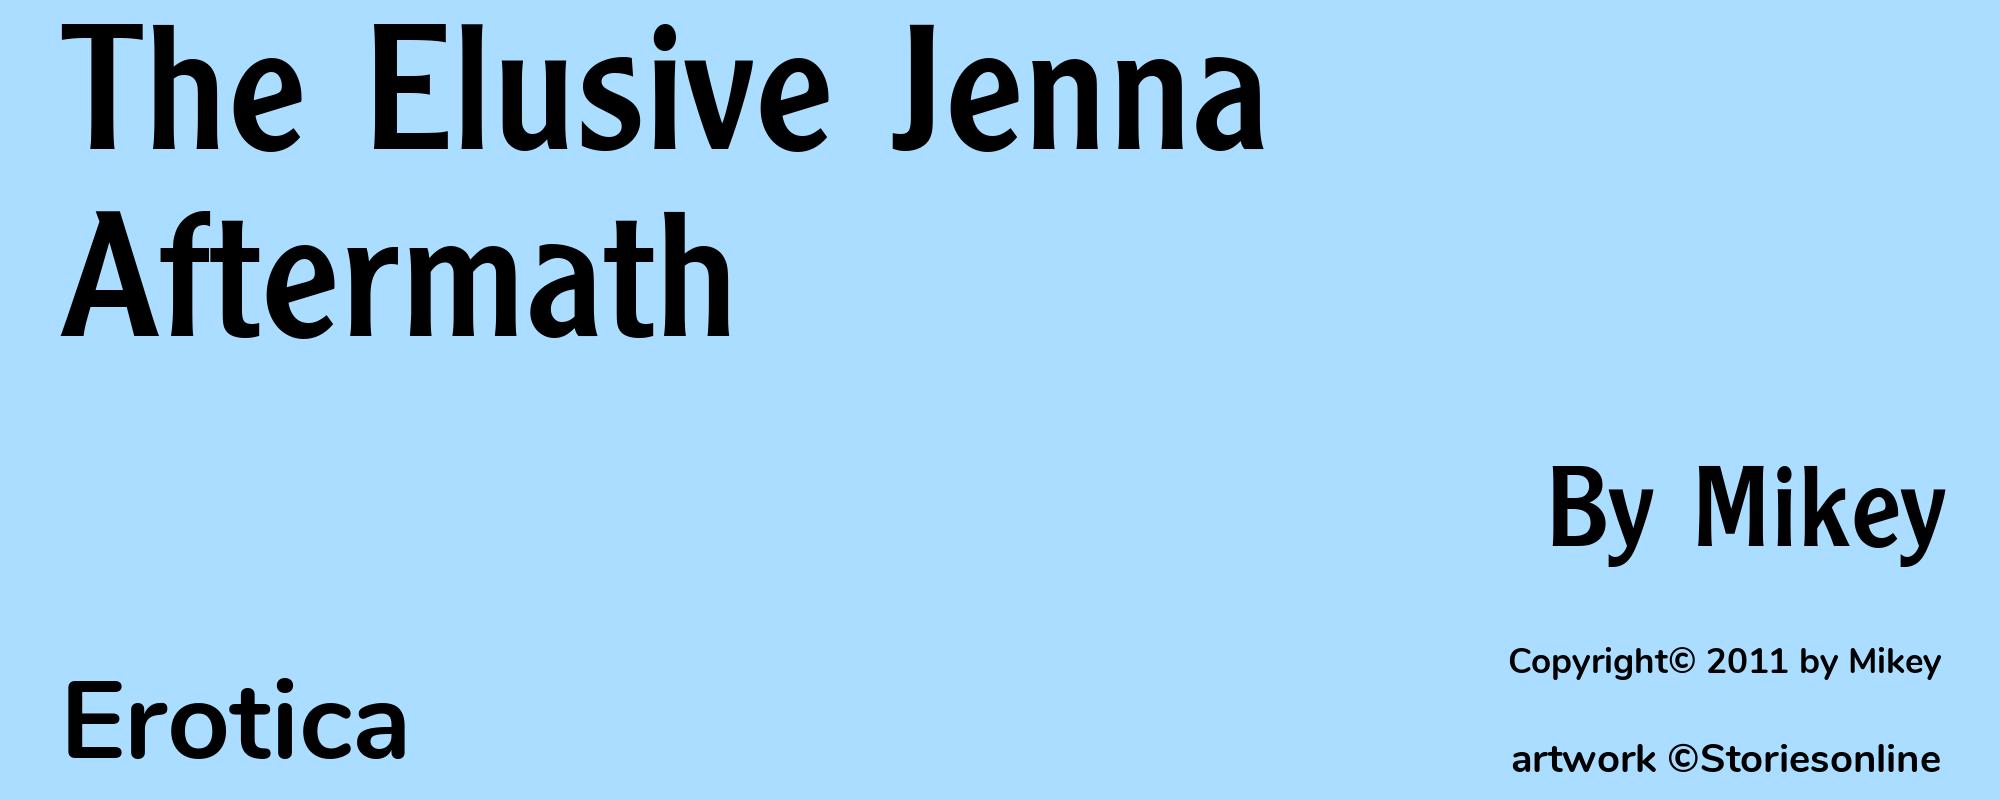 The Elusive Jenna Aftermath - Cover